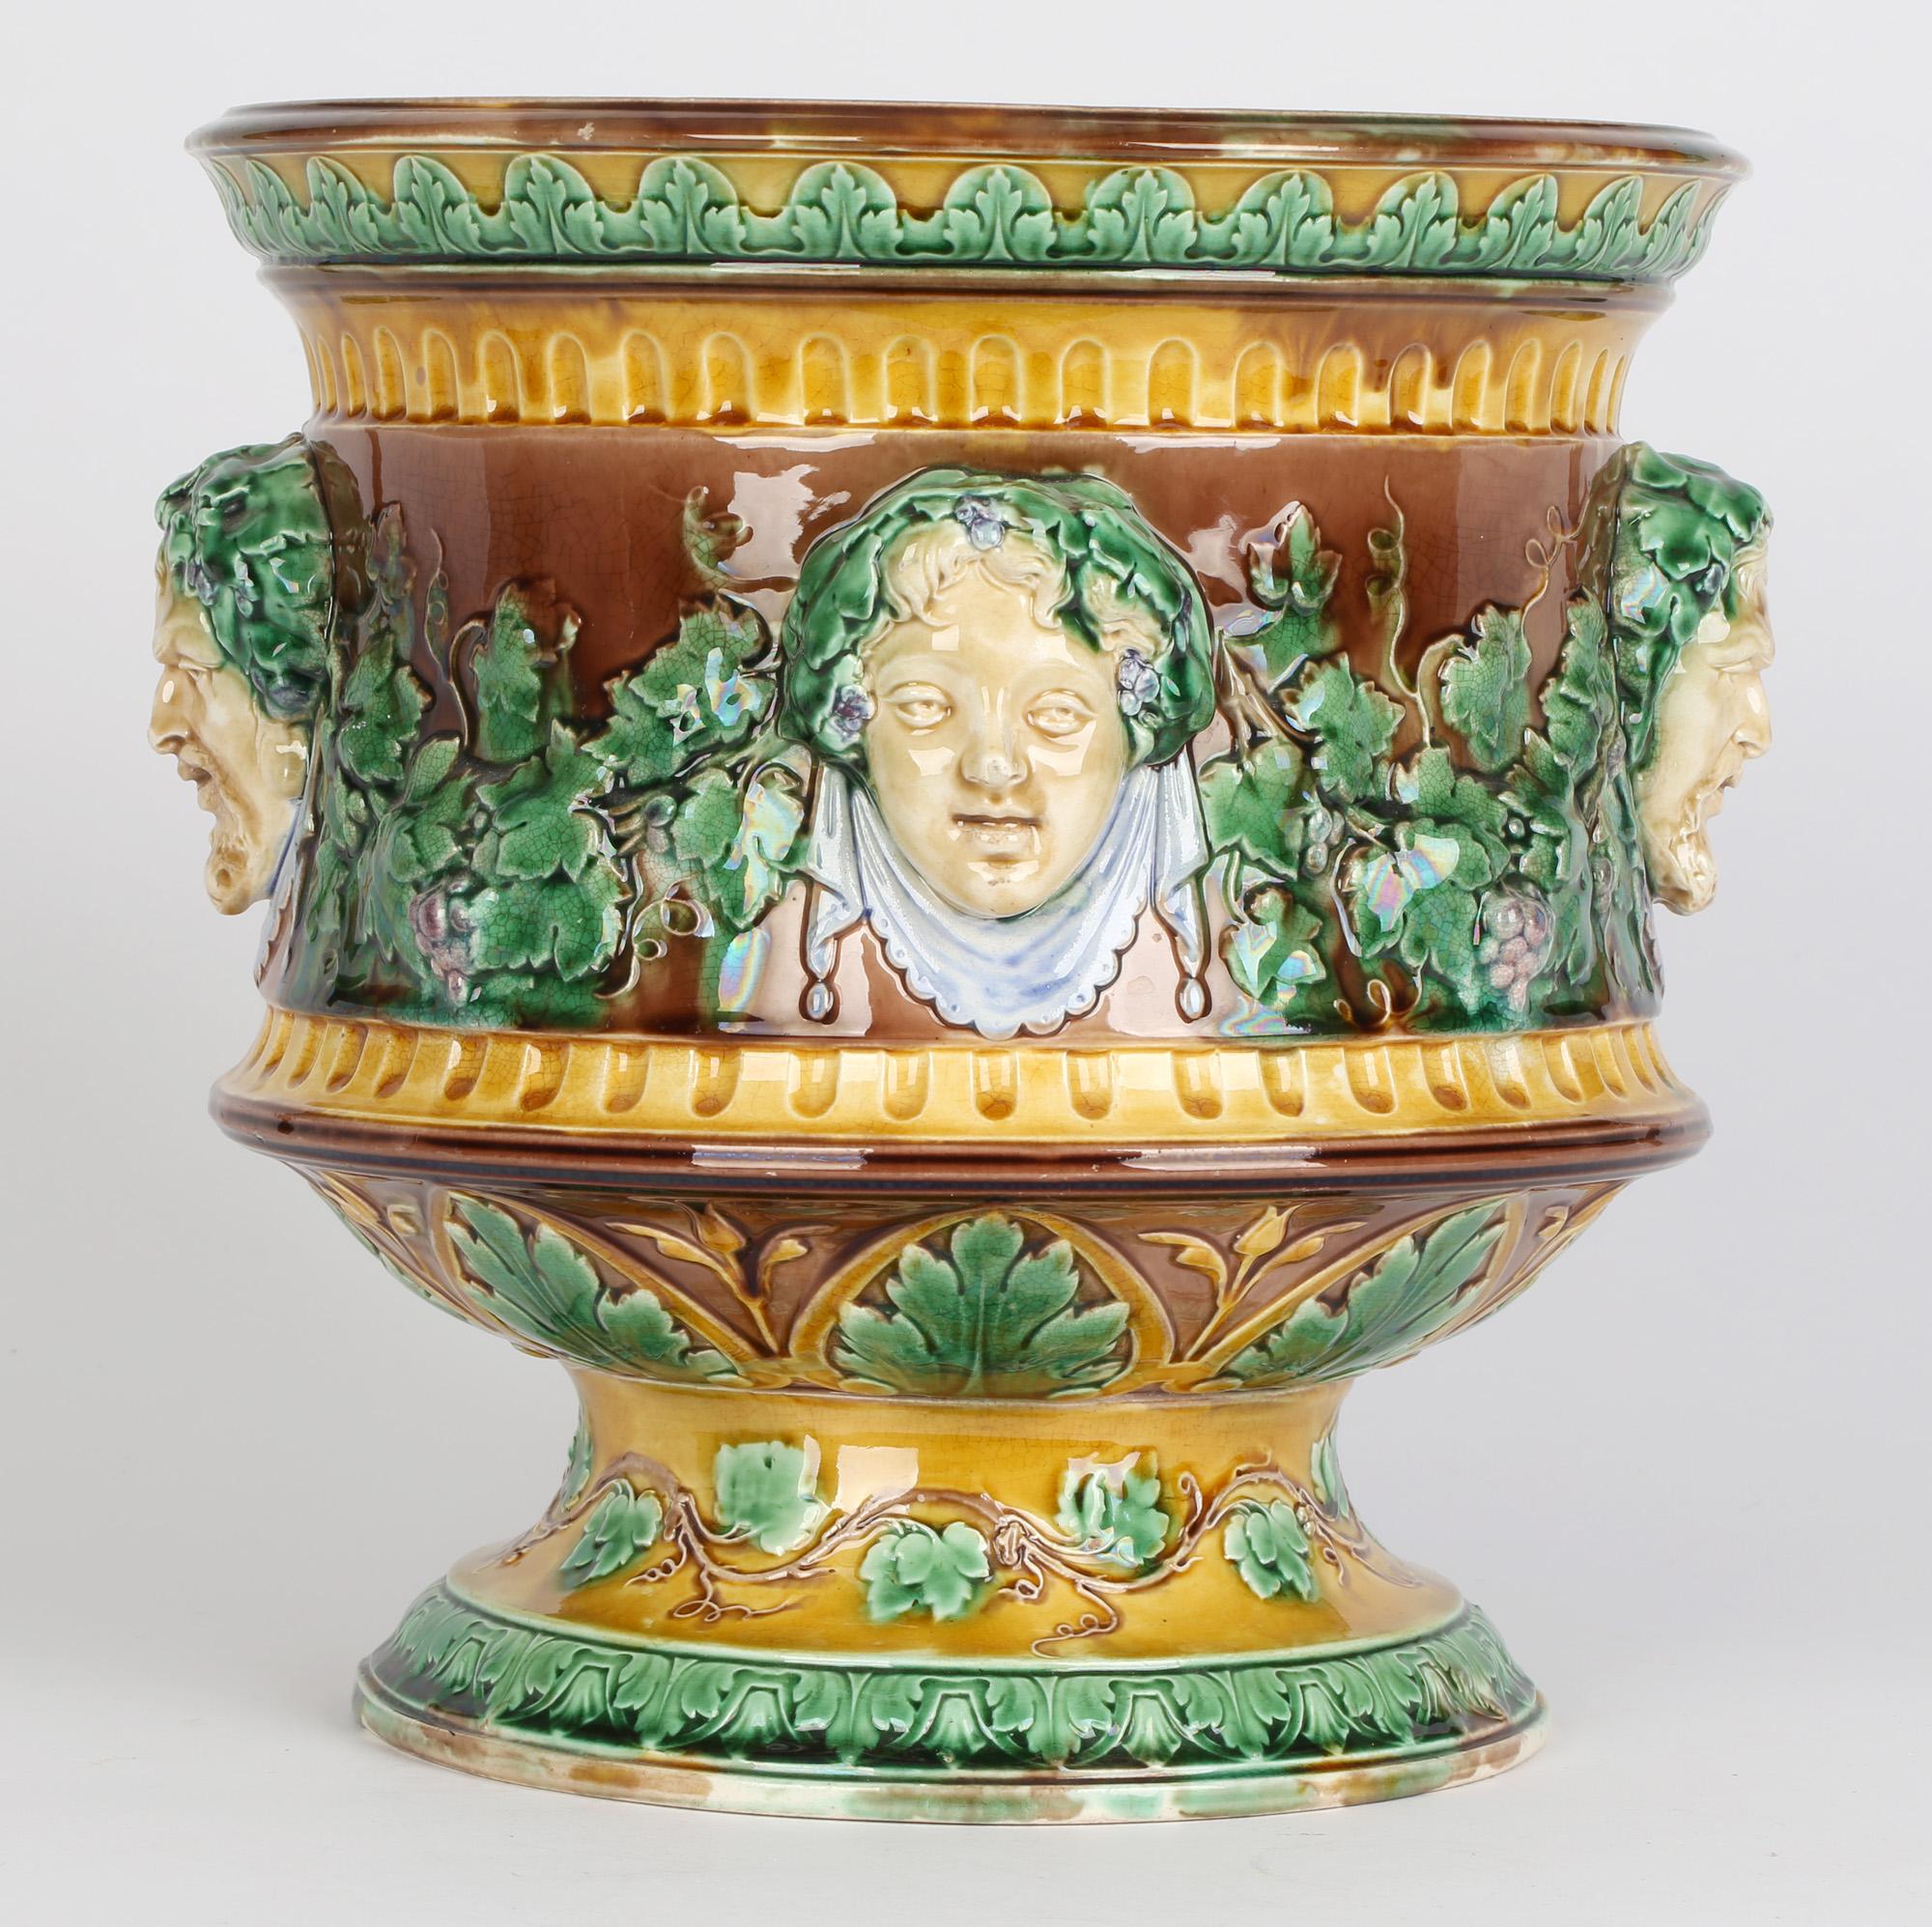 Wedgwood Large and Impressive Majolica Jardiniere with Masks and Trailing Vines For Sale 1